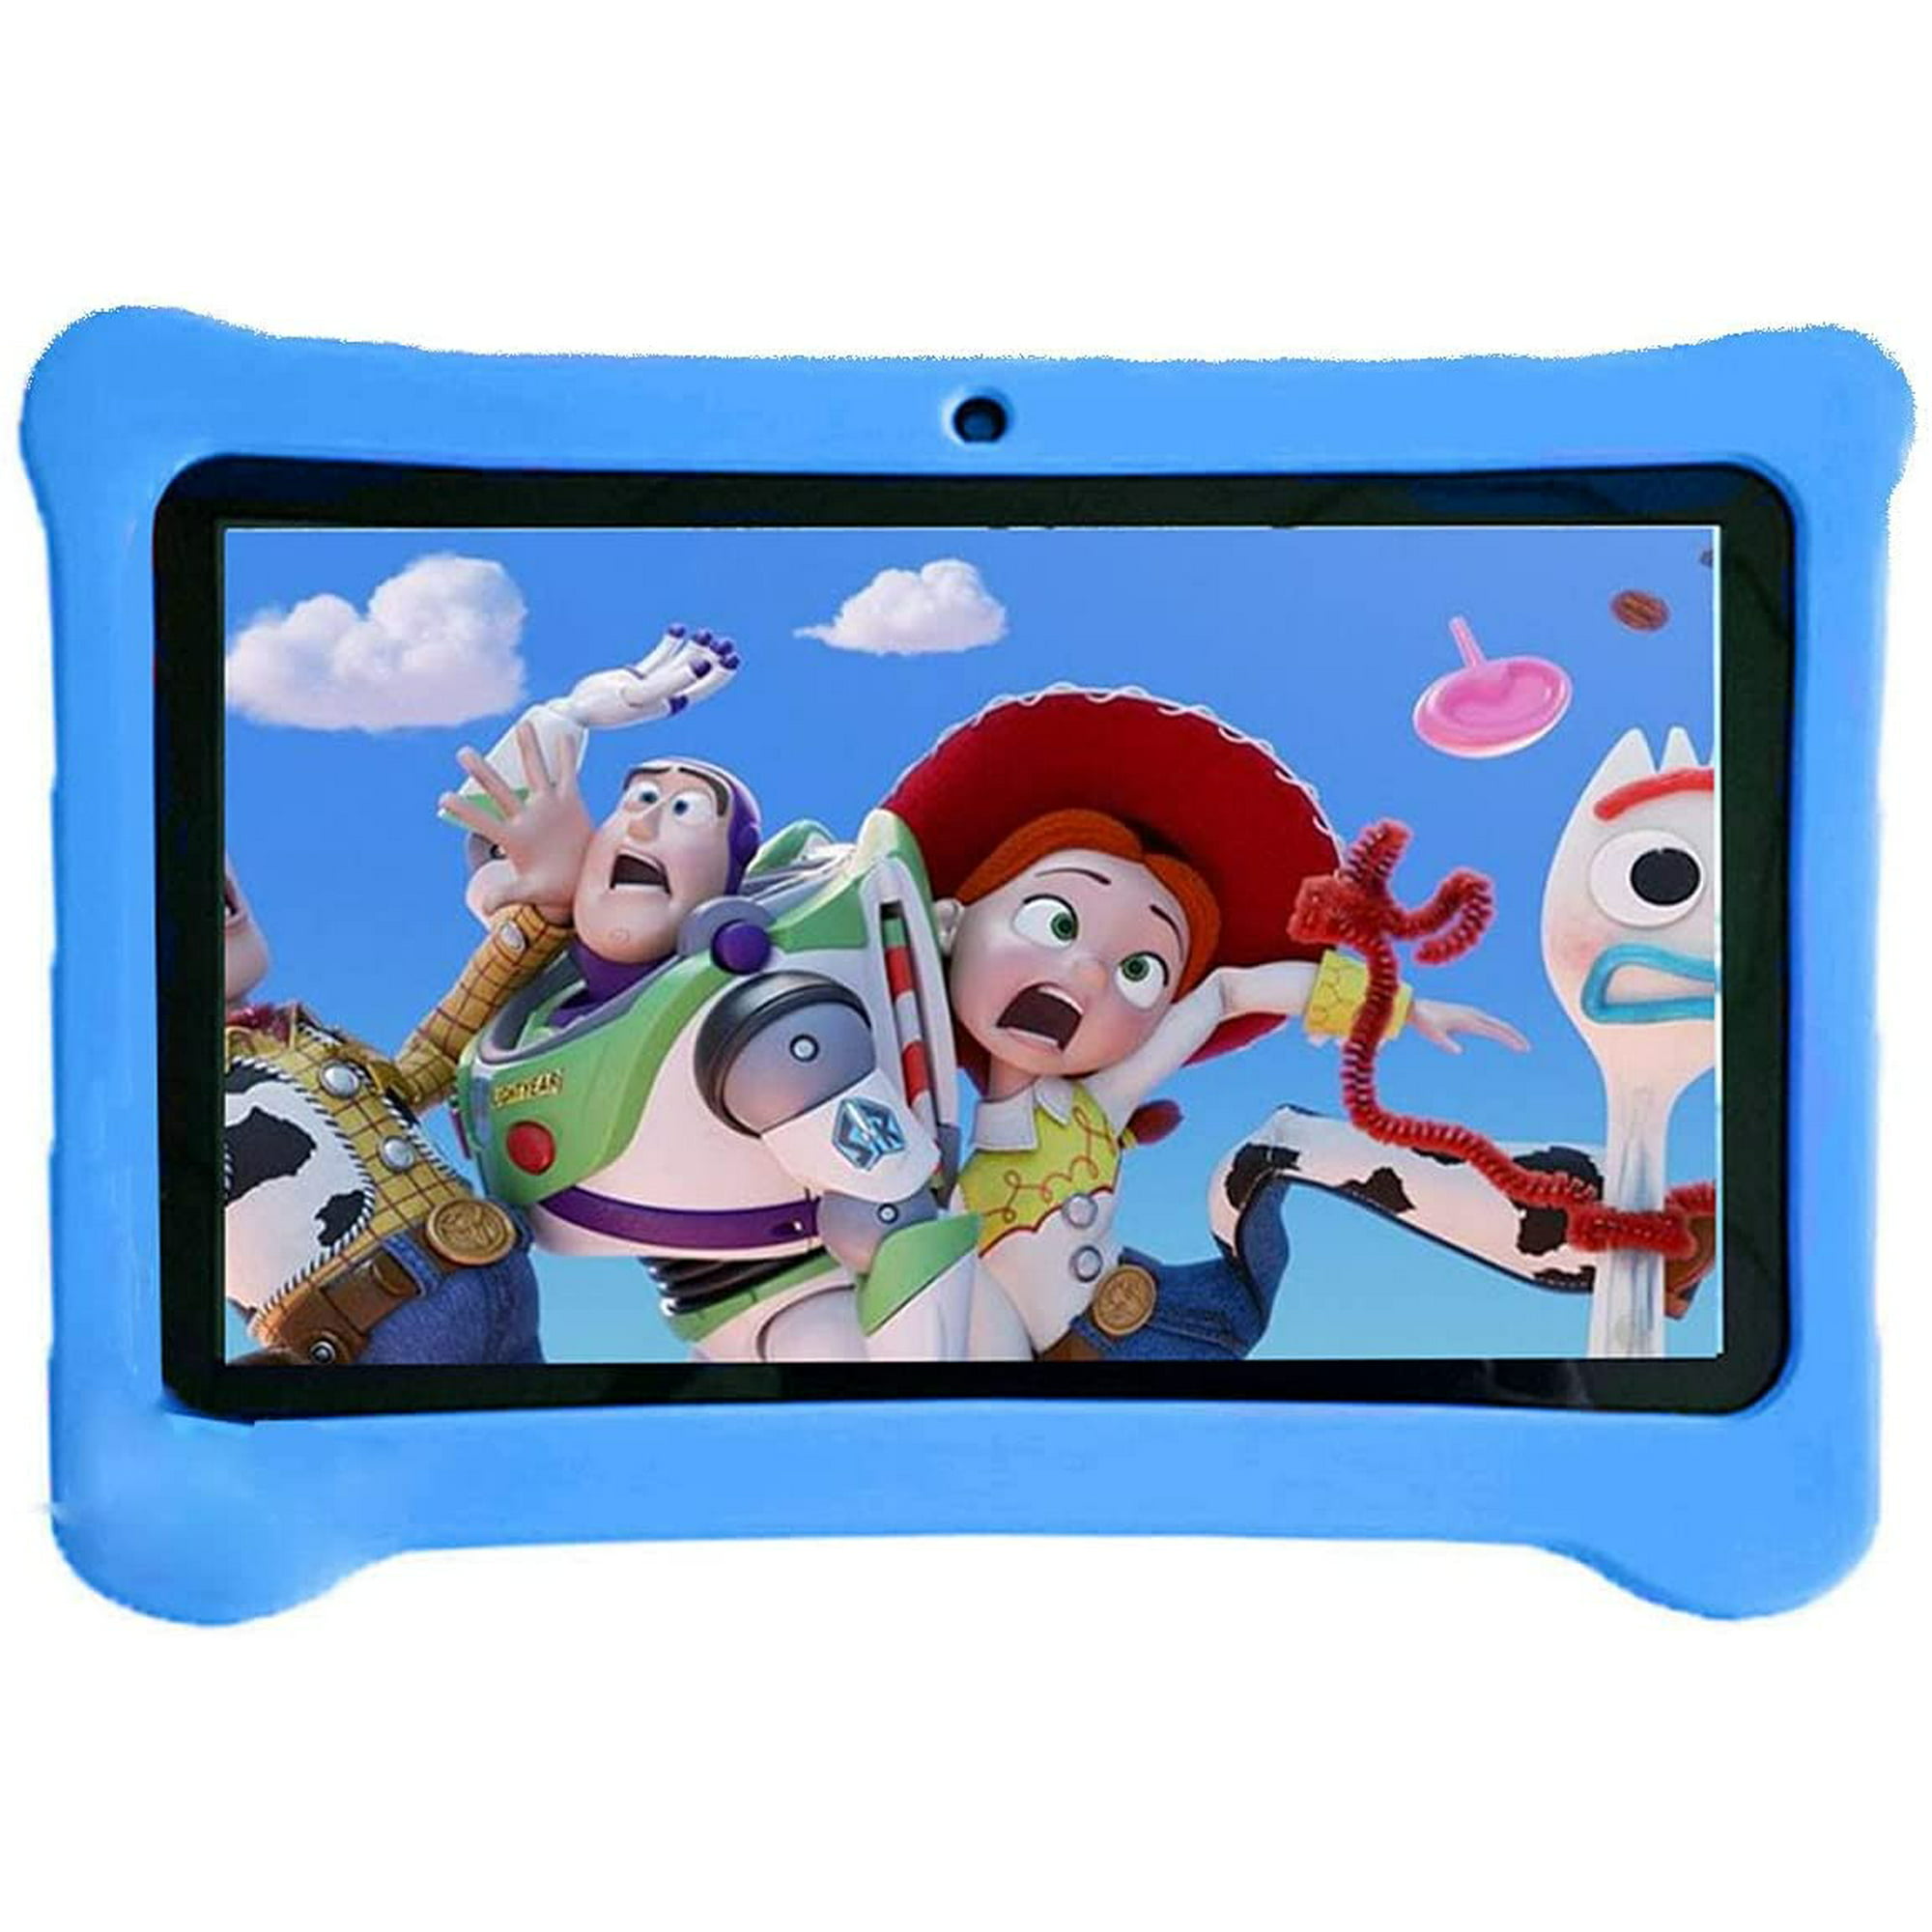 Kids Tablet,7 inch Android  Kids Edition Tablet with WiFi, hildren  Tablet with Parental Control, 40+APP Pre-Installed and Kids-Proof Case |  Walmart Canada